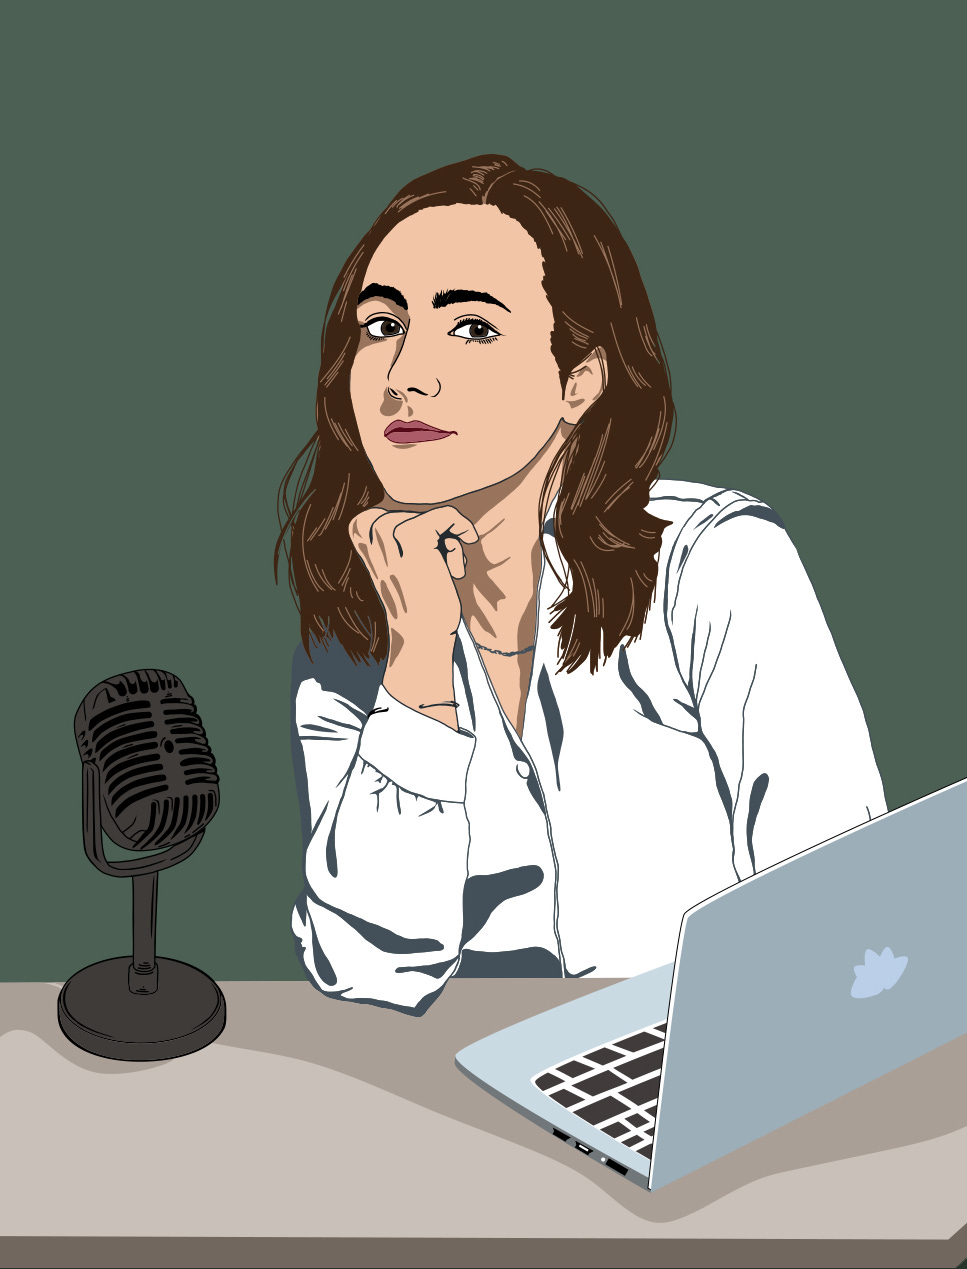 illustration by Montreal artist La Pimbêche of a woman with long brown hair leaning against a desk with a mic and a laptop. for obsessed interviews series by Michelle Béland